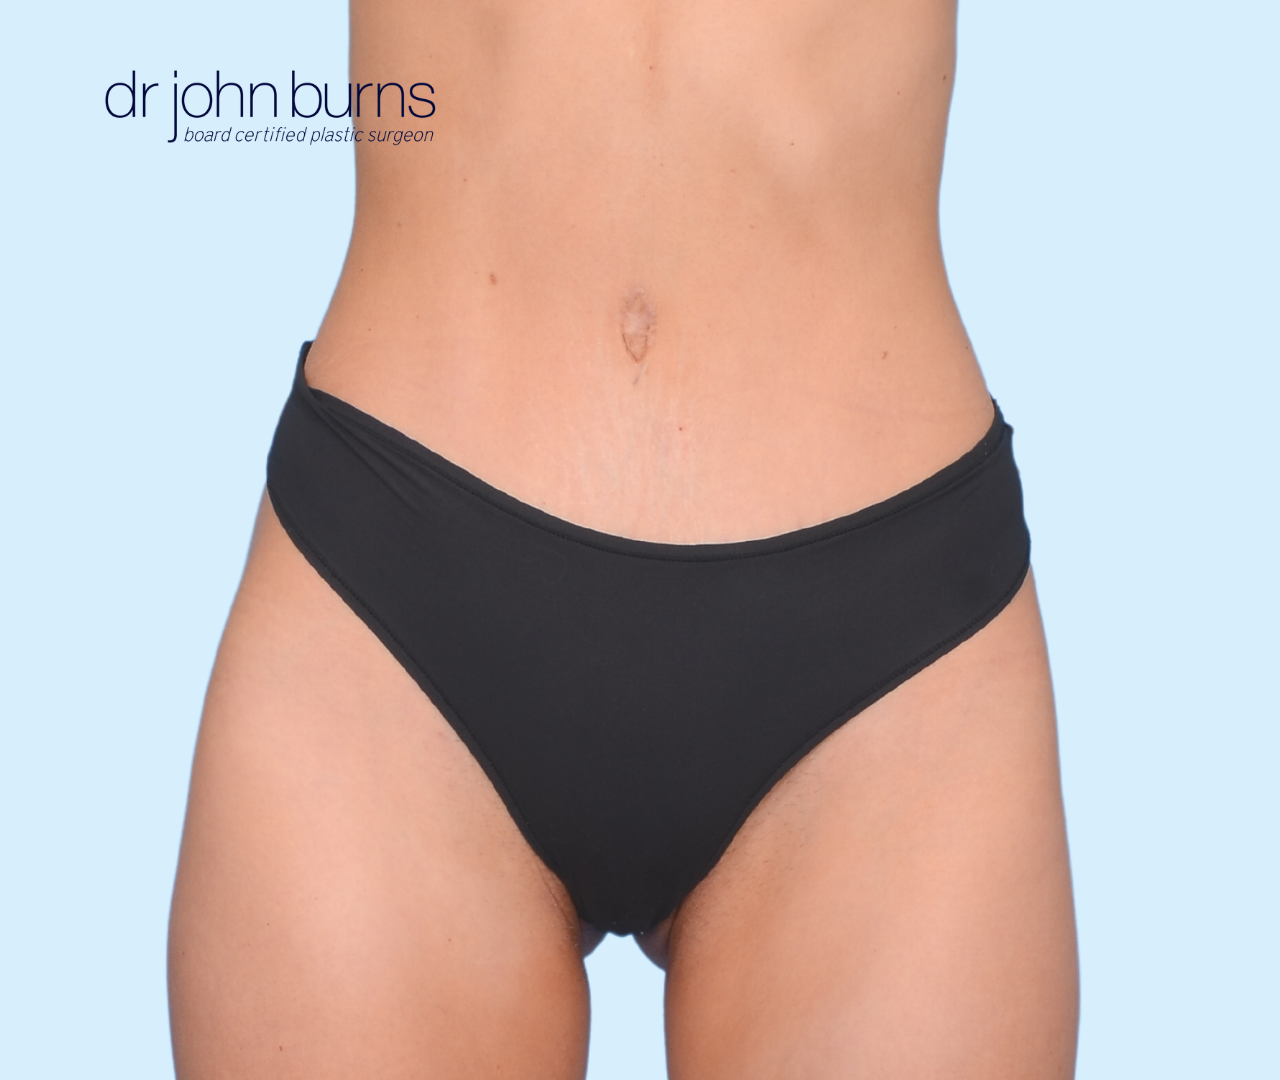 tiny tummy tuck result with scar covered by black bikini bottoms